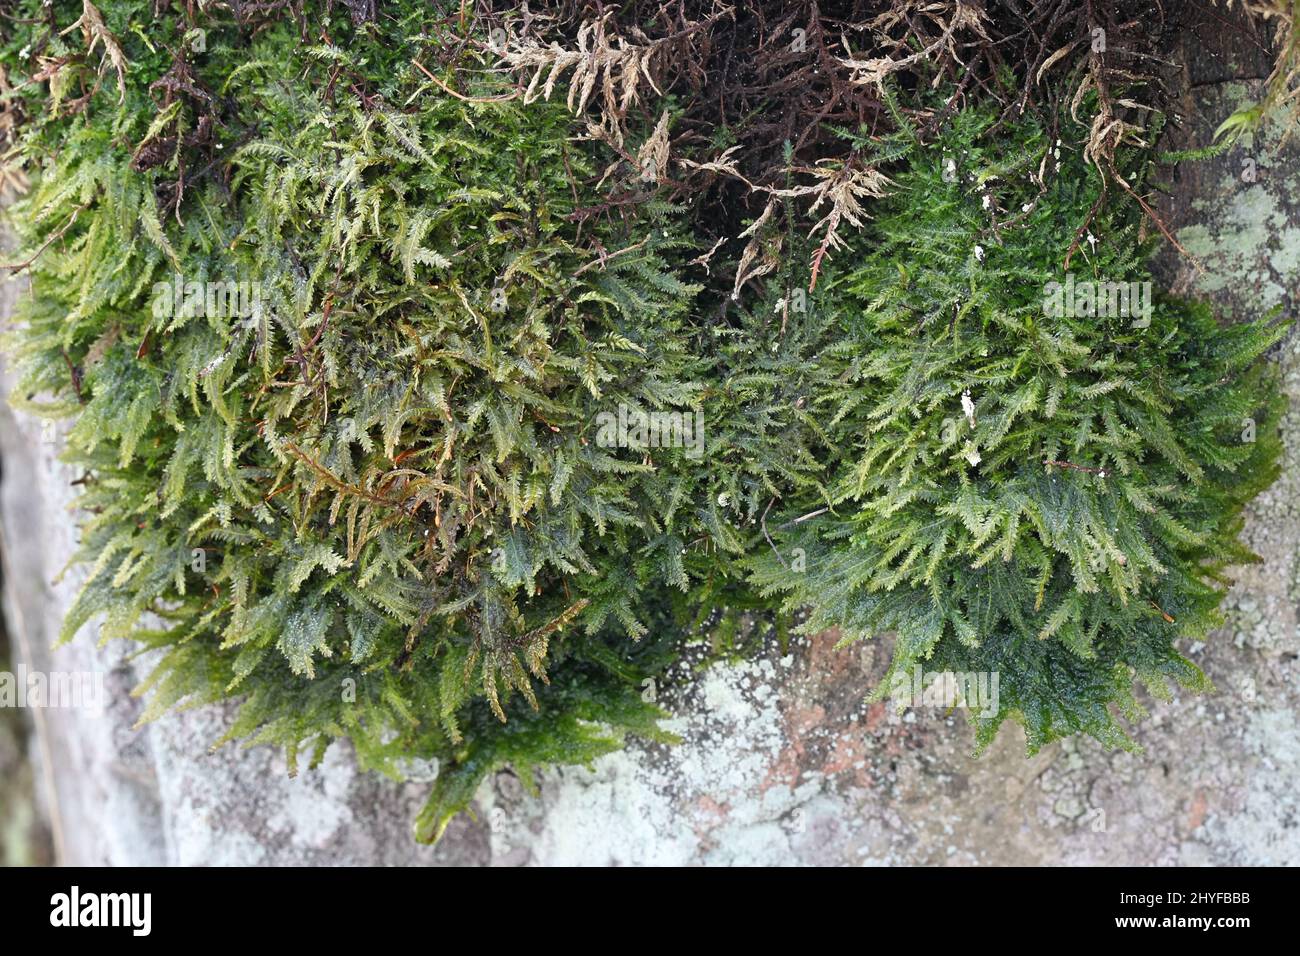 Plagiothecium denticulatum, commonly known as Toothed Plagiothecium Moss, growing on rock surface in Finland Stock Photo